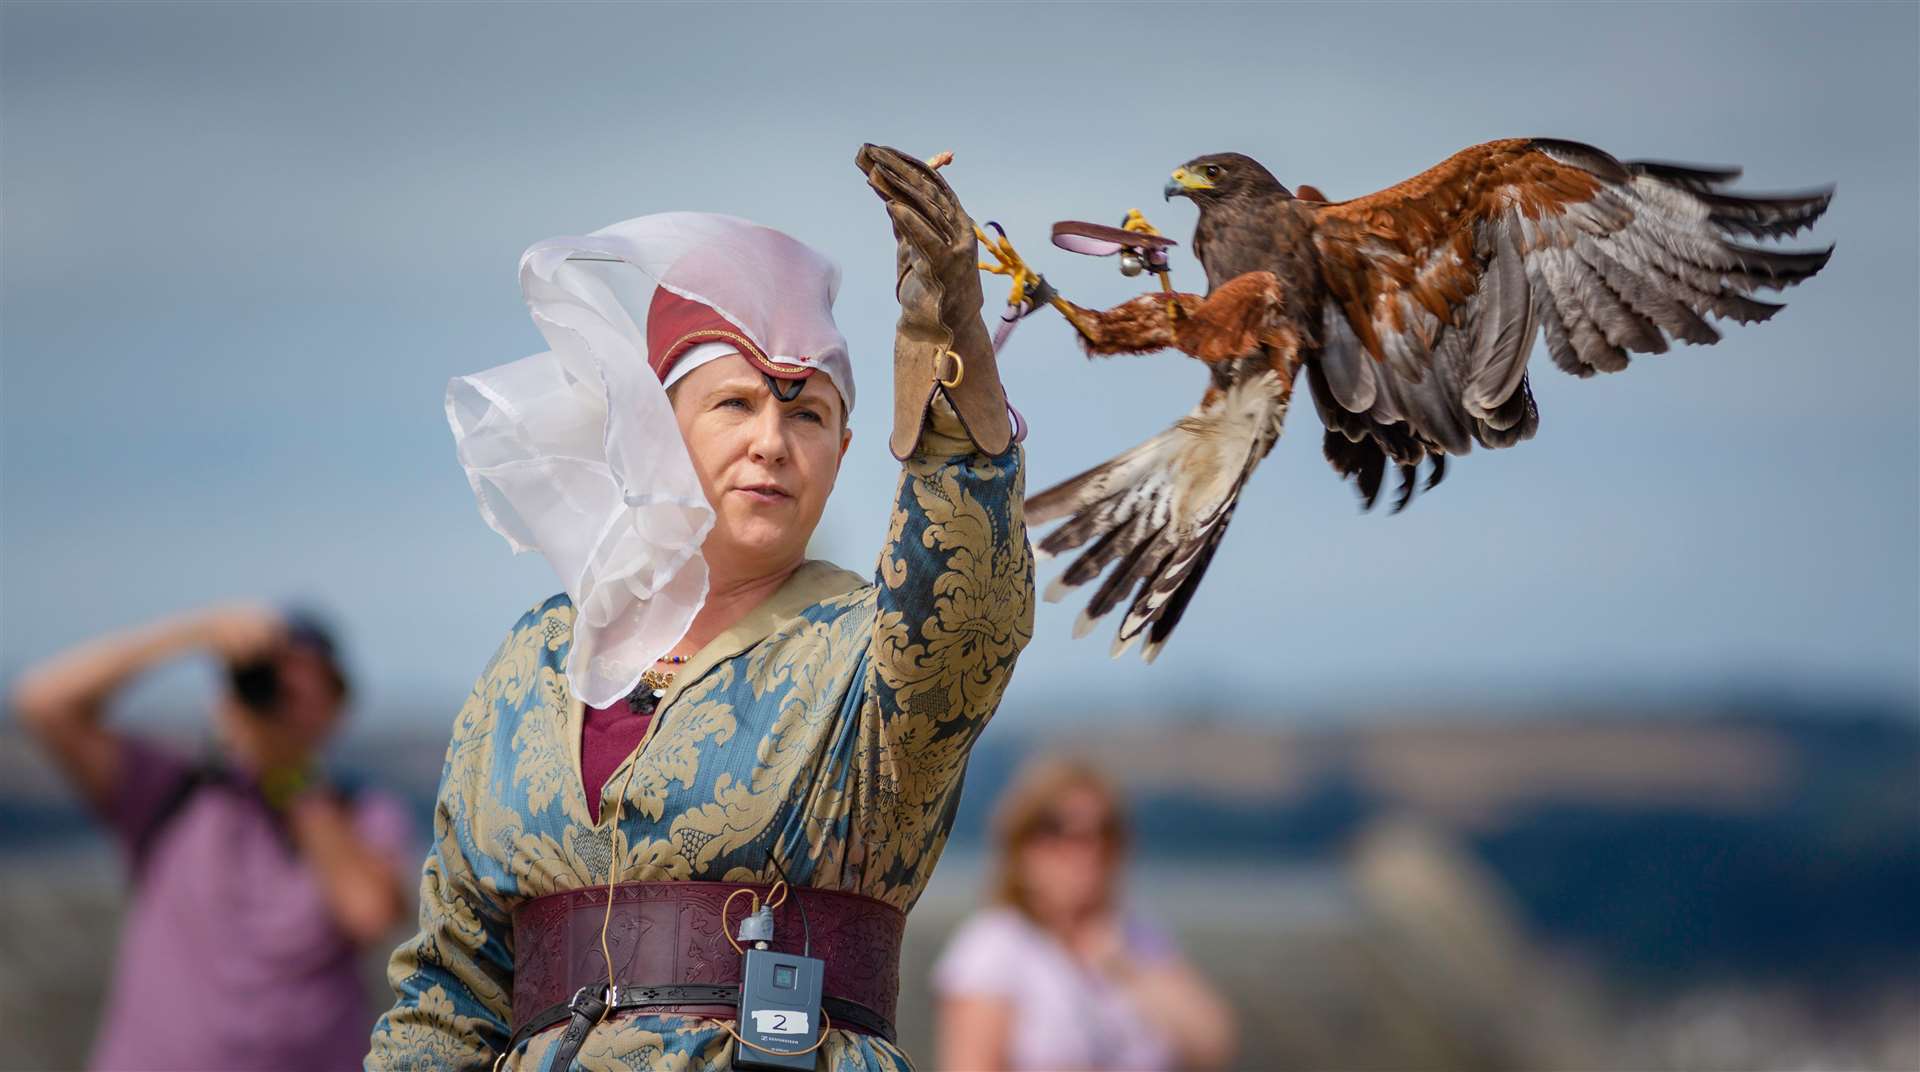 Learn about falconry in Medieval times Picture: by Christopher Ison for English Heritage